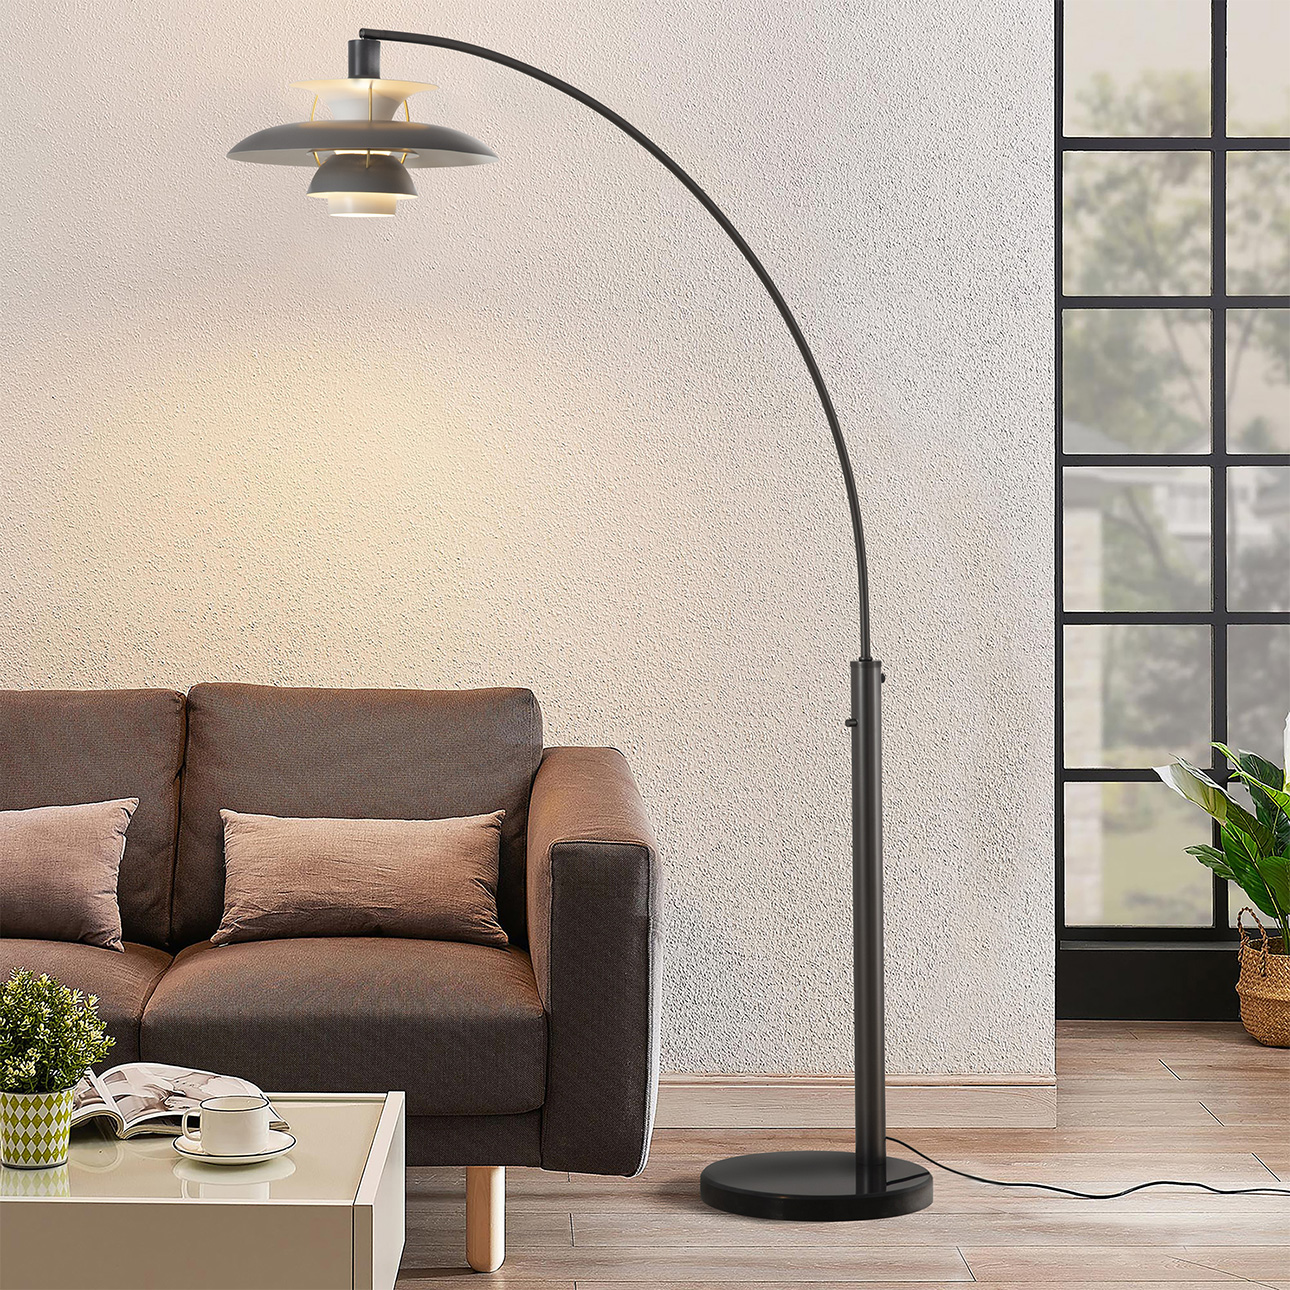 Palm Springs 83″ 1 Light Arc Lamp in Gunmetal and Graytone Shade with Dimmer Switch